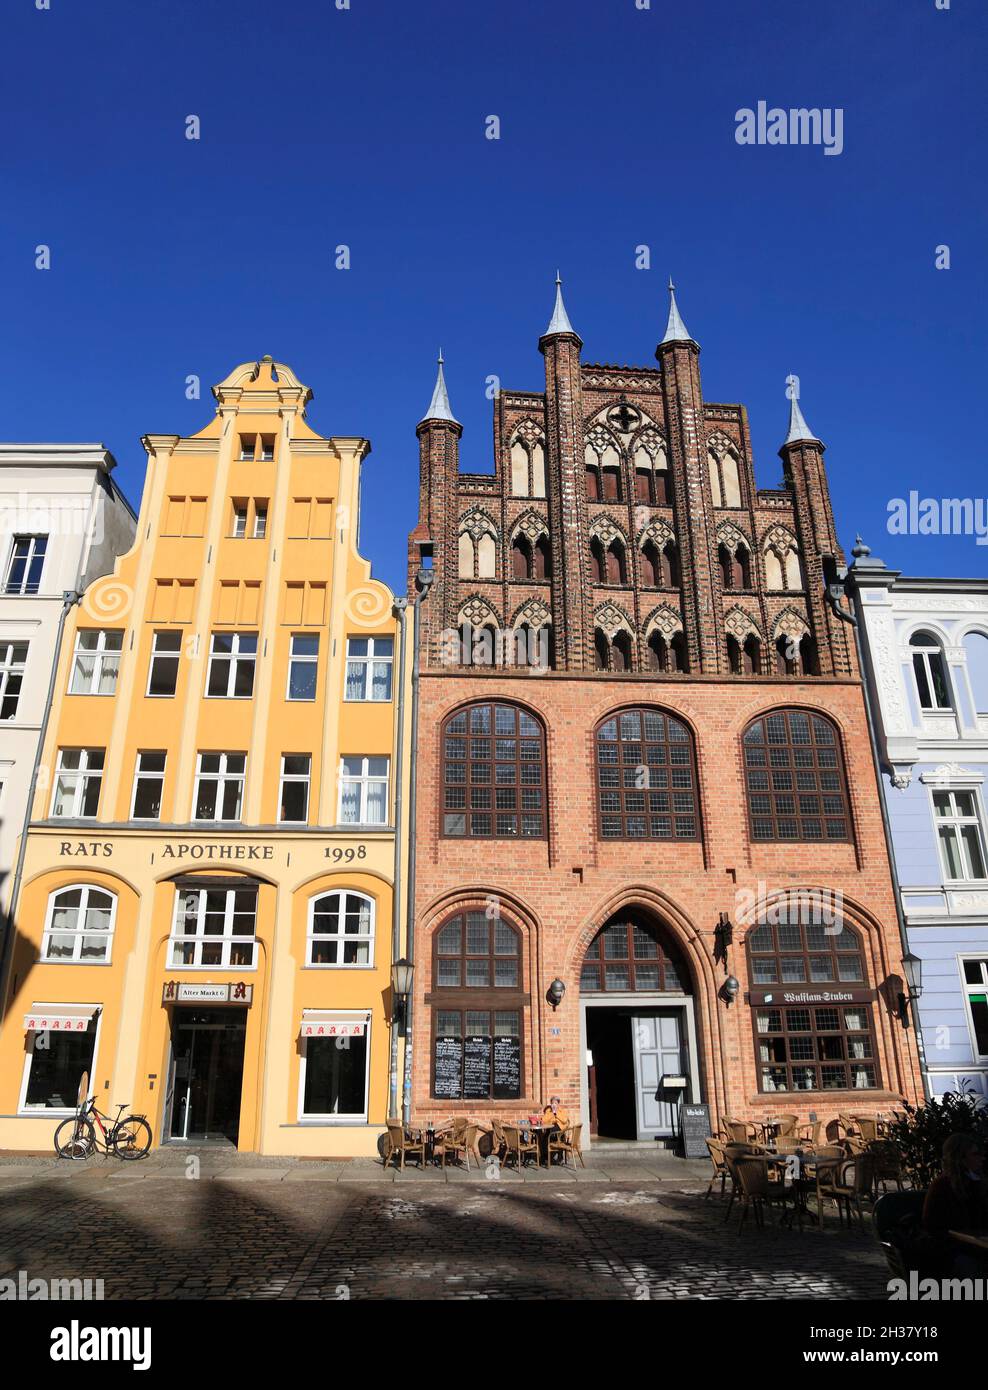 Wulflam-house (right) at the old market and Ratsapotheke, Hanseatic city Stralsund, Mecklenburg Western Pomerania, Germany, Europe Stock Photo